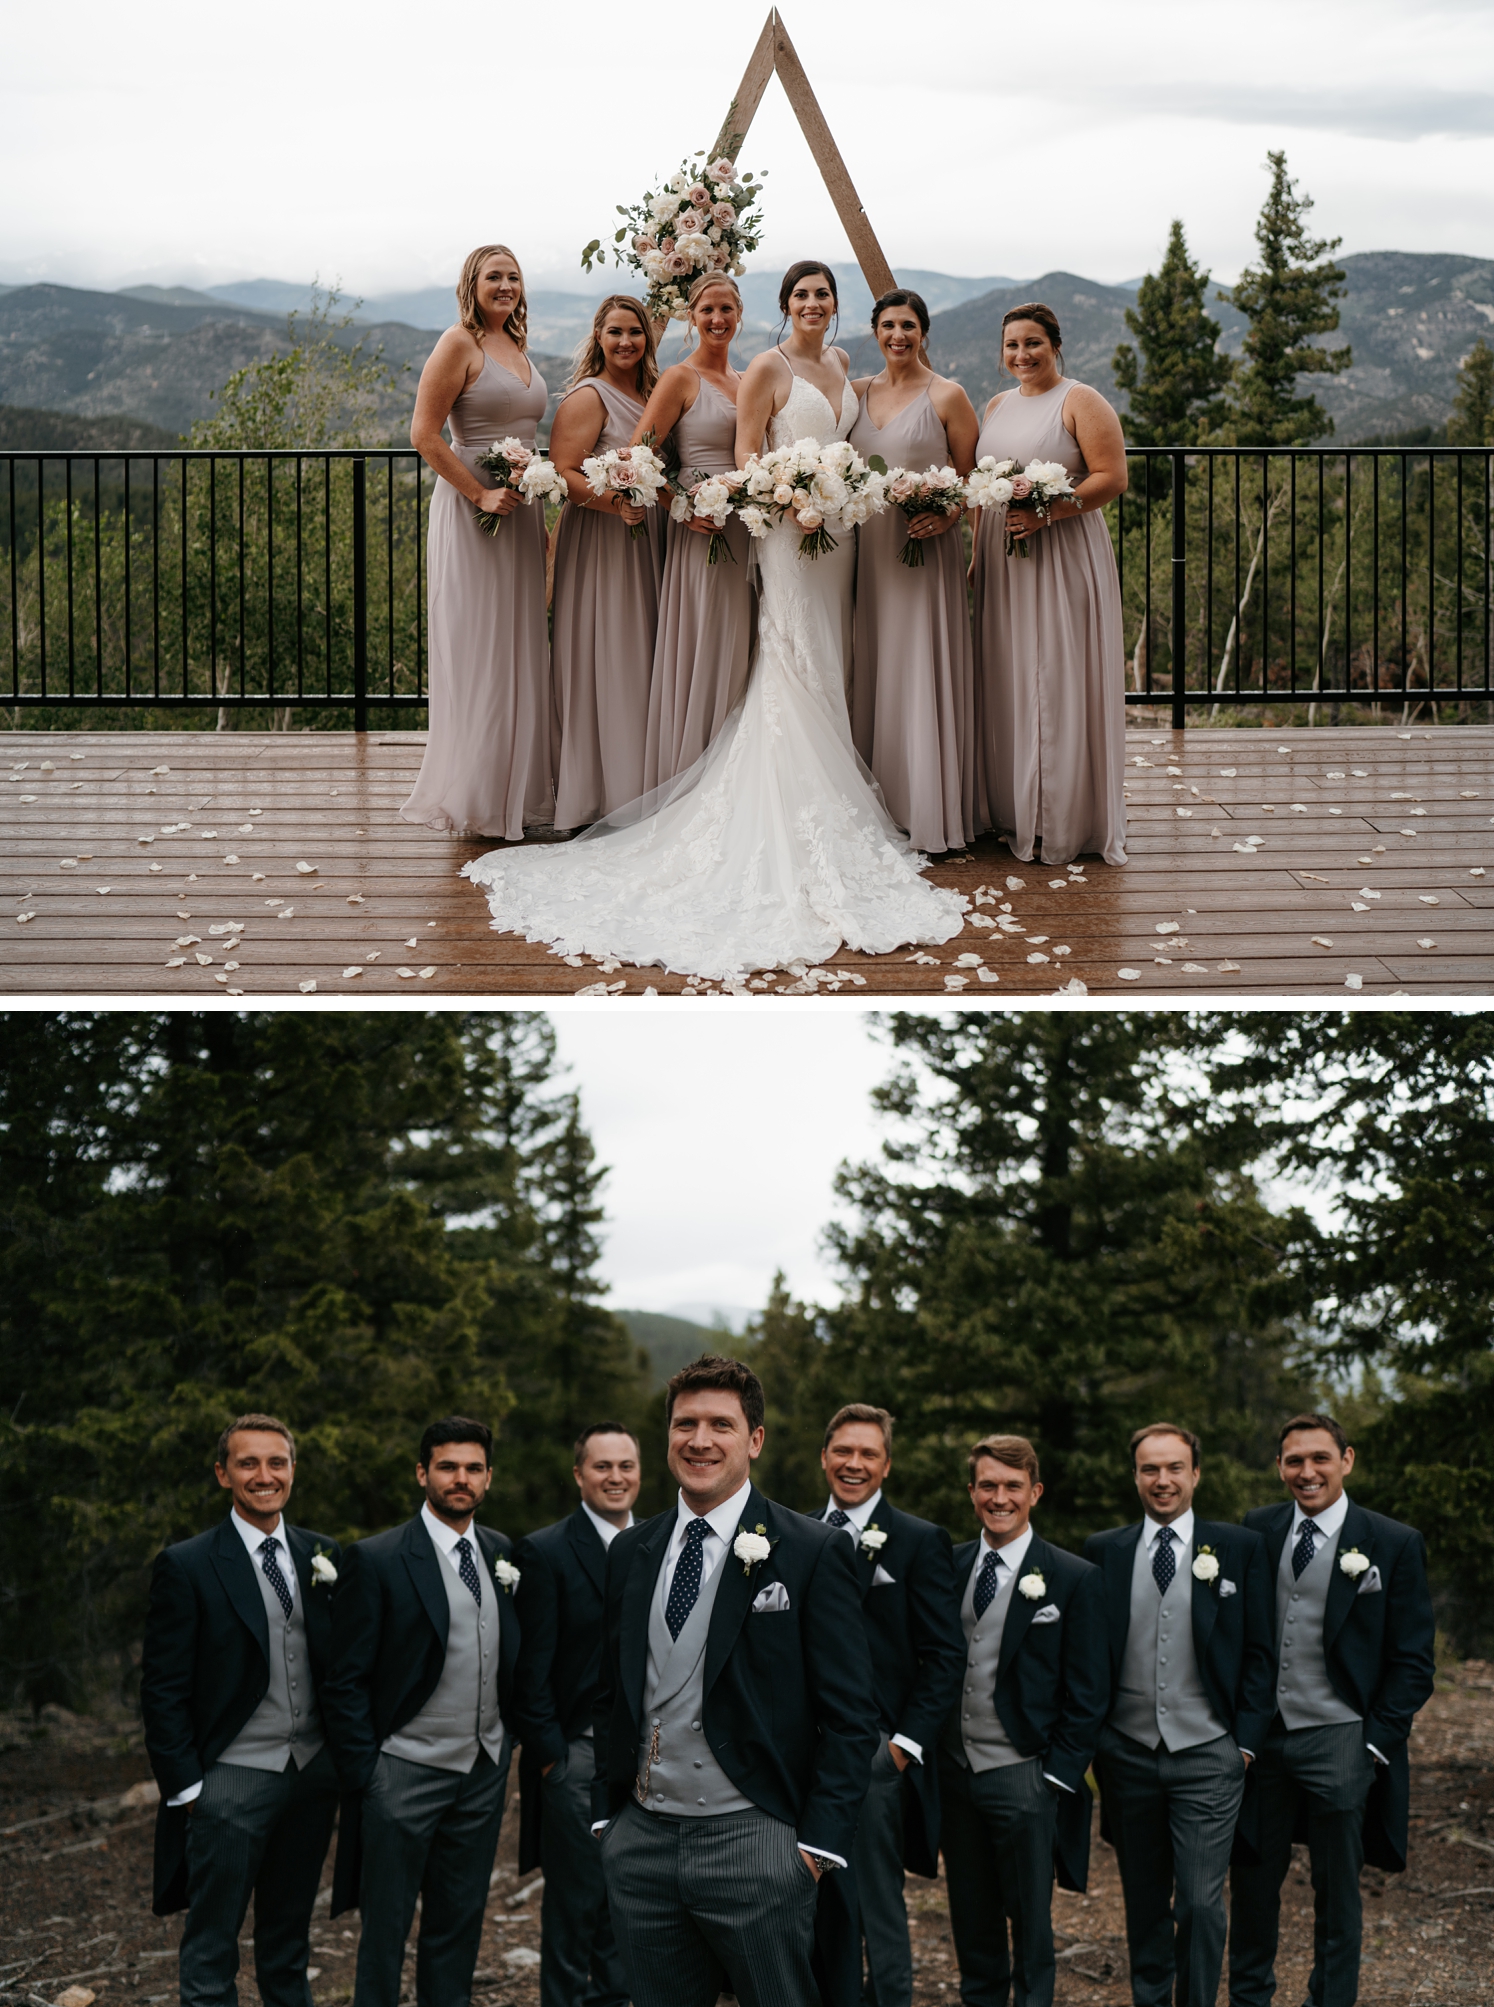 Bride with bridesmaids light gray dresses and carrying bouquets of peonies | Groom and groomsmen wearing morning suits | McArthur Weddings and Events